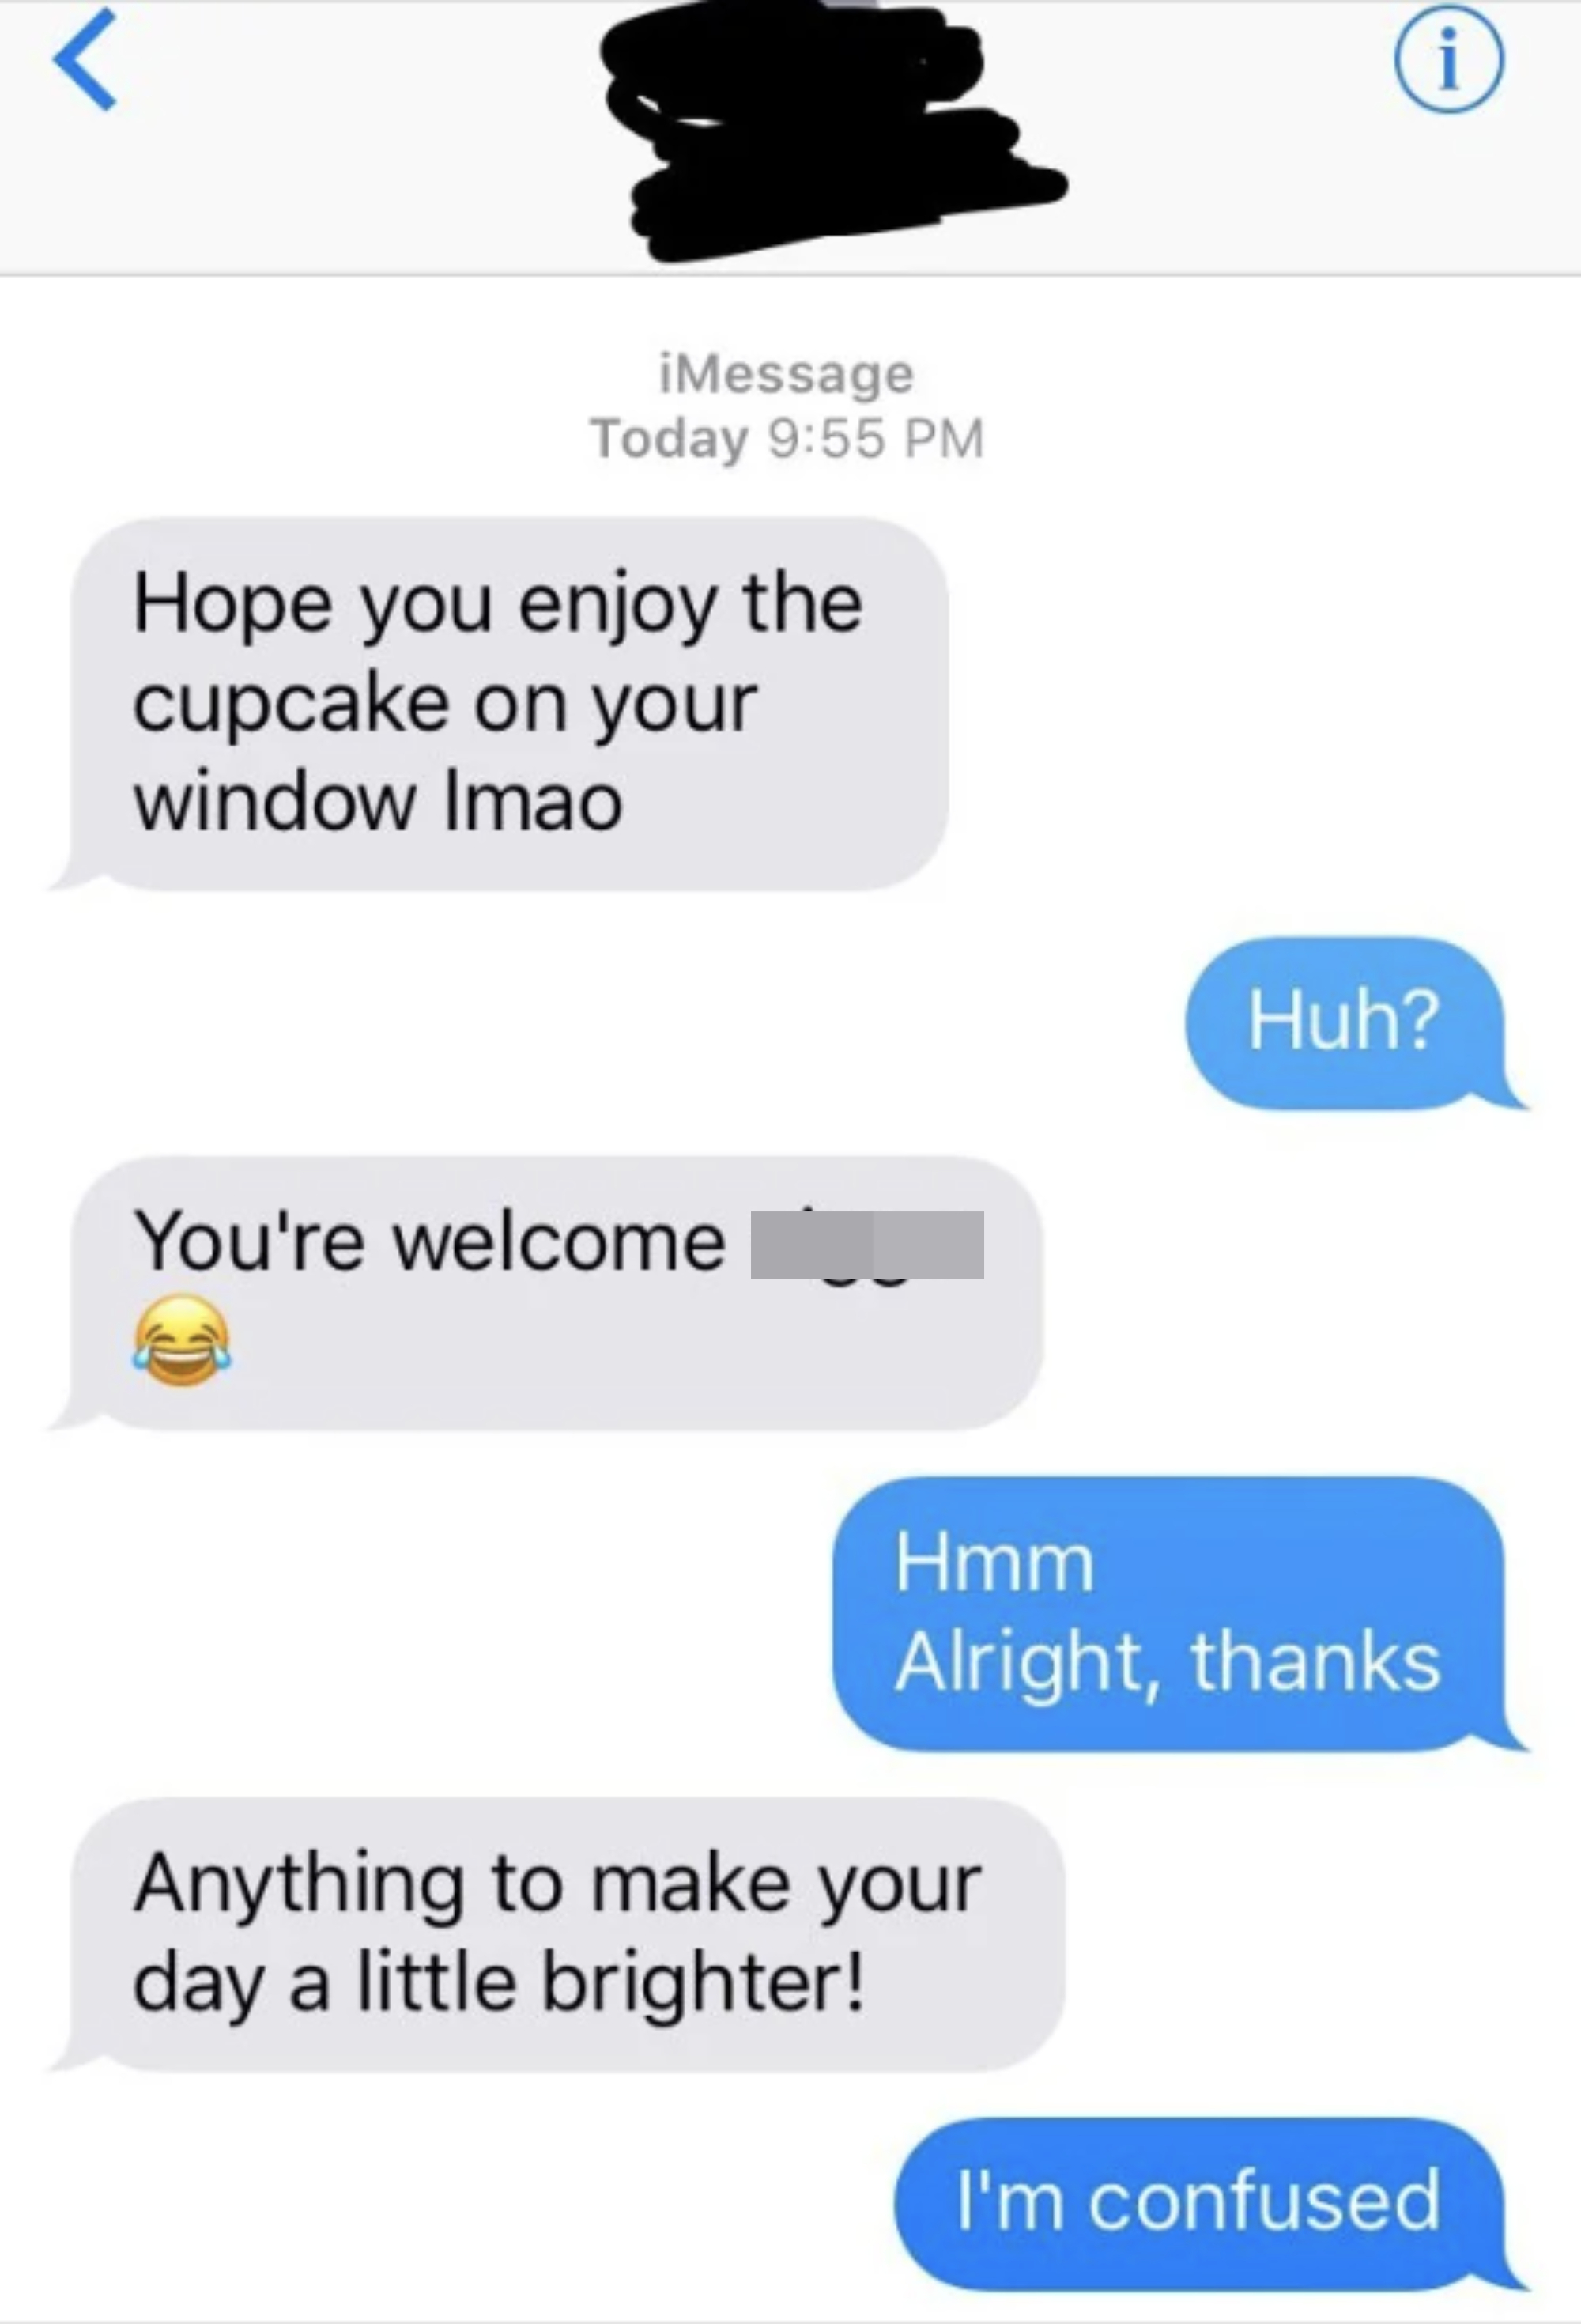 hope you enjoy your cupcake, anything to make your day brighter, and the ex responds with i&#x27;m confused